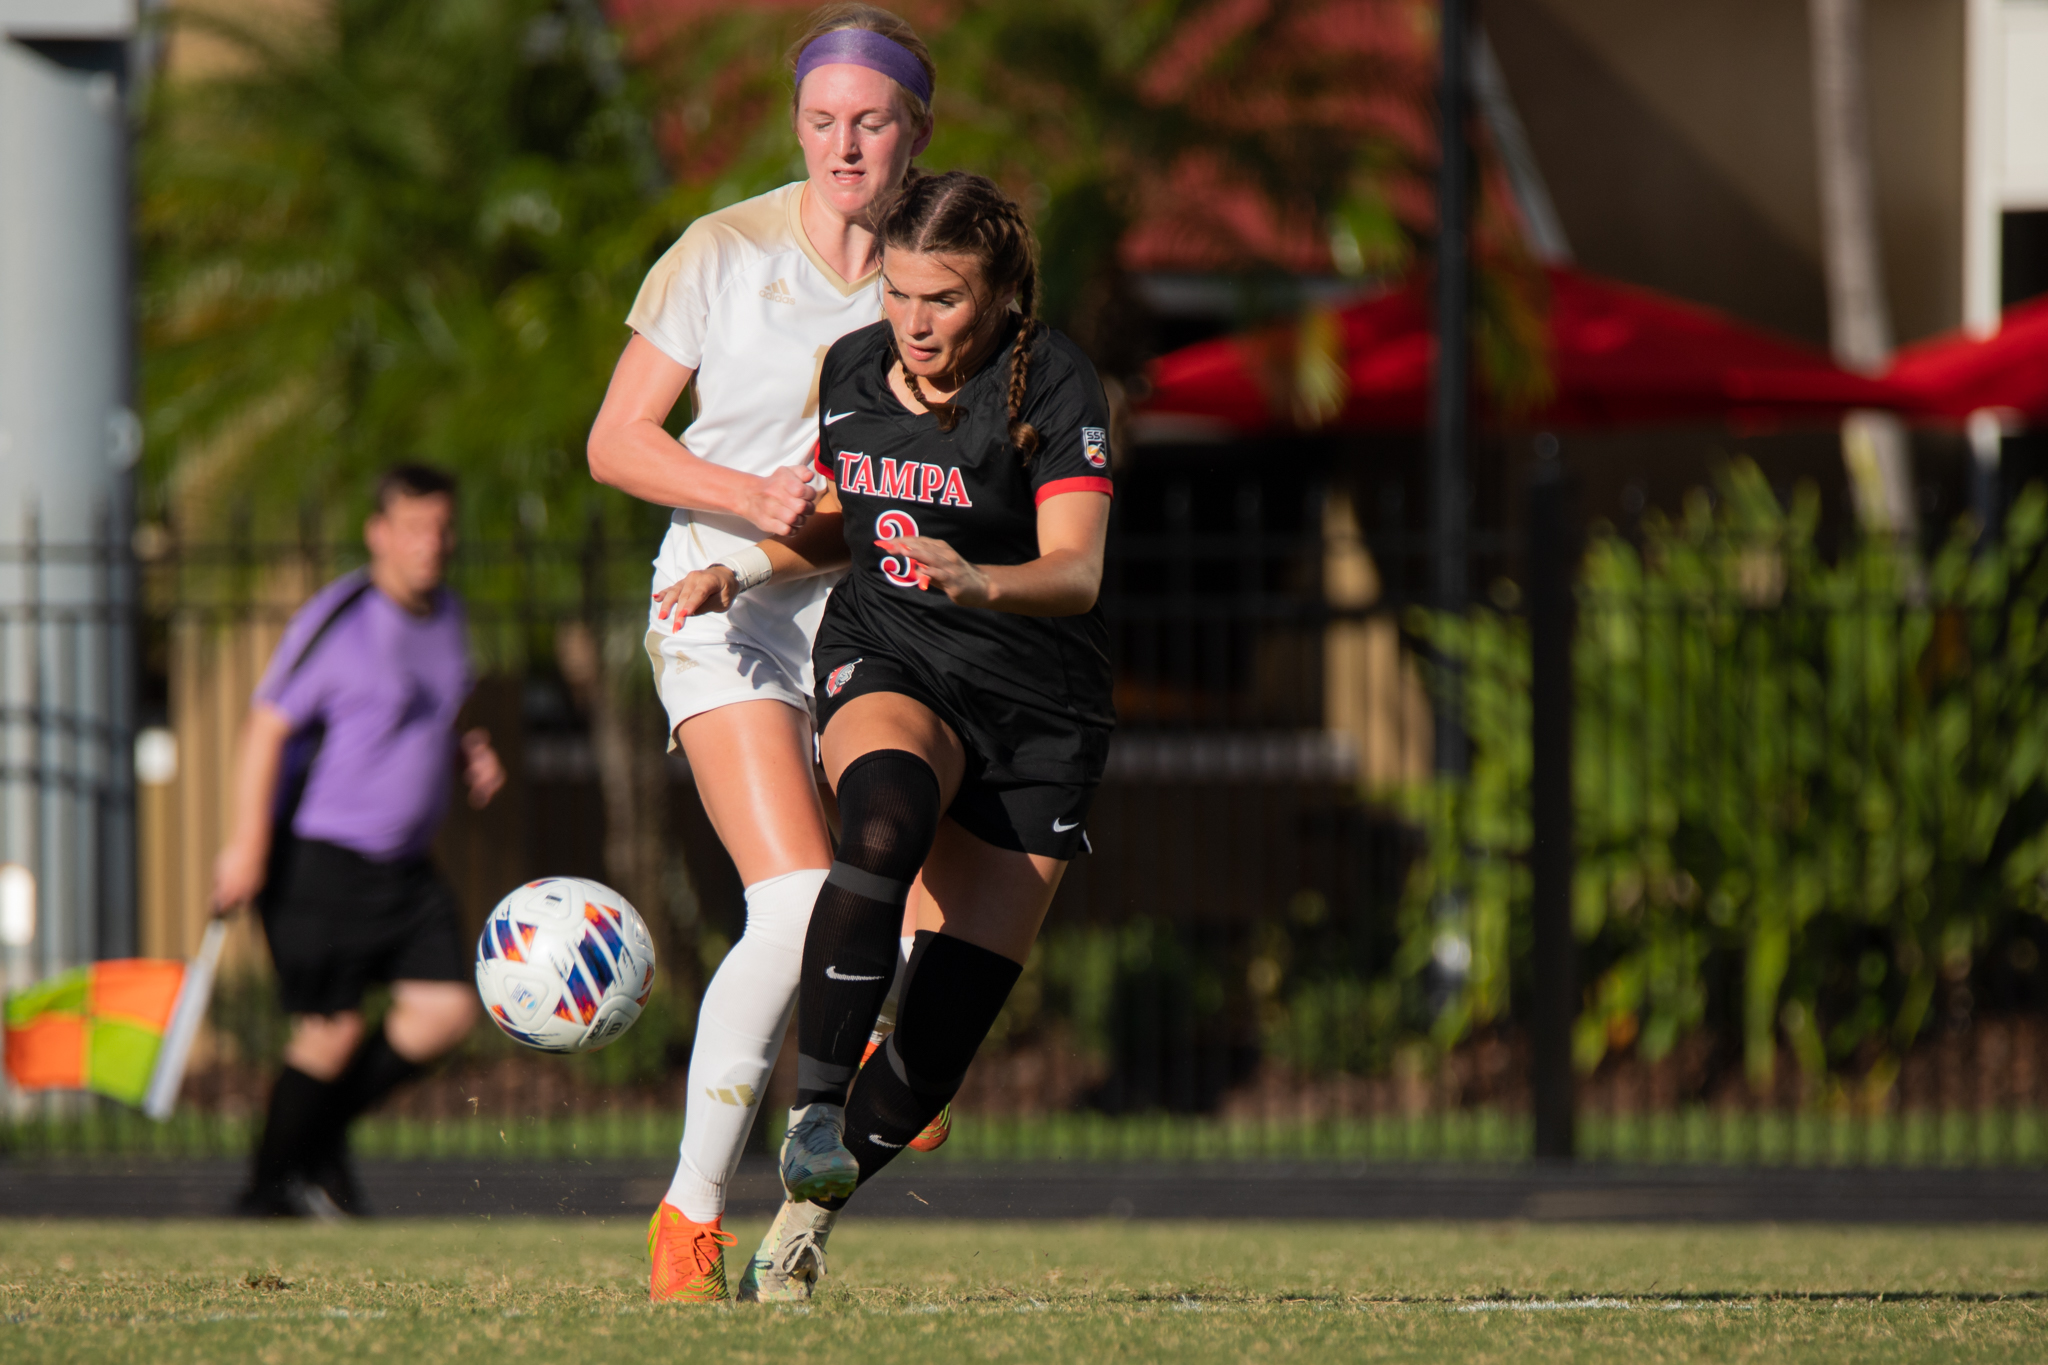 Tampa Falls to Eckerd 2-0 For First Loss of Season